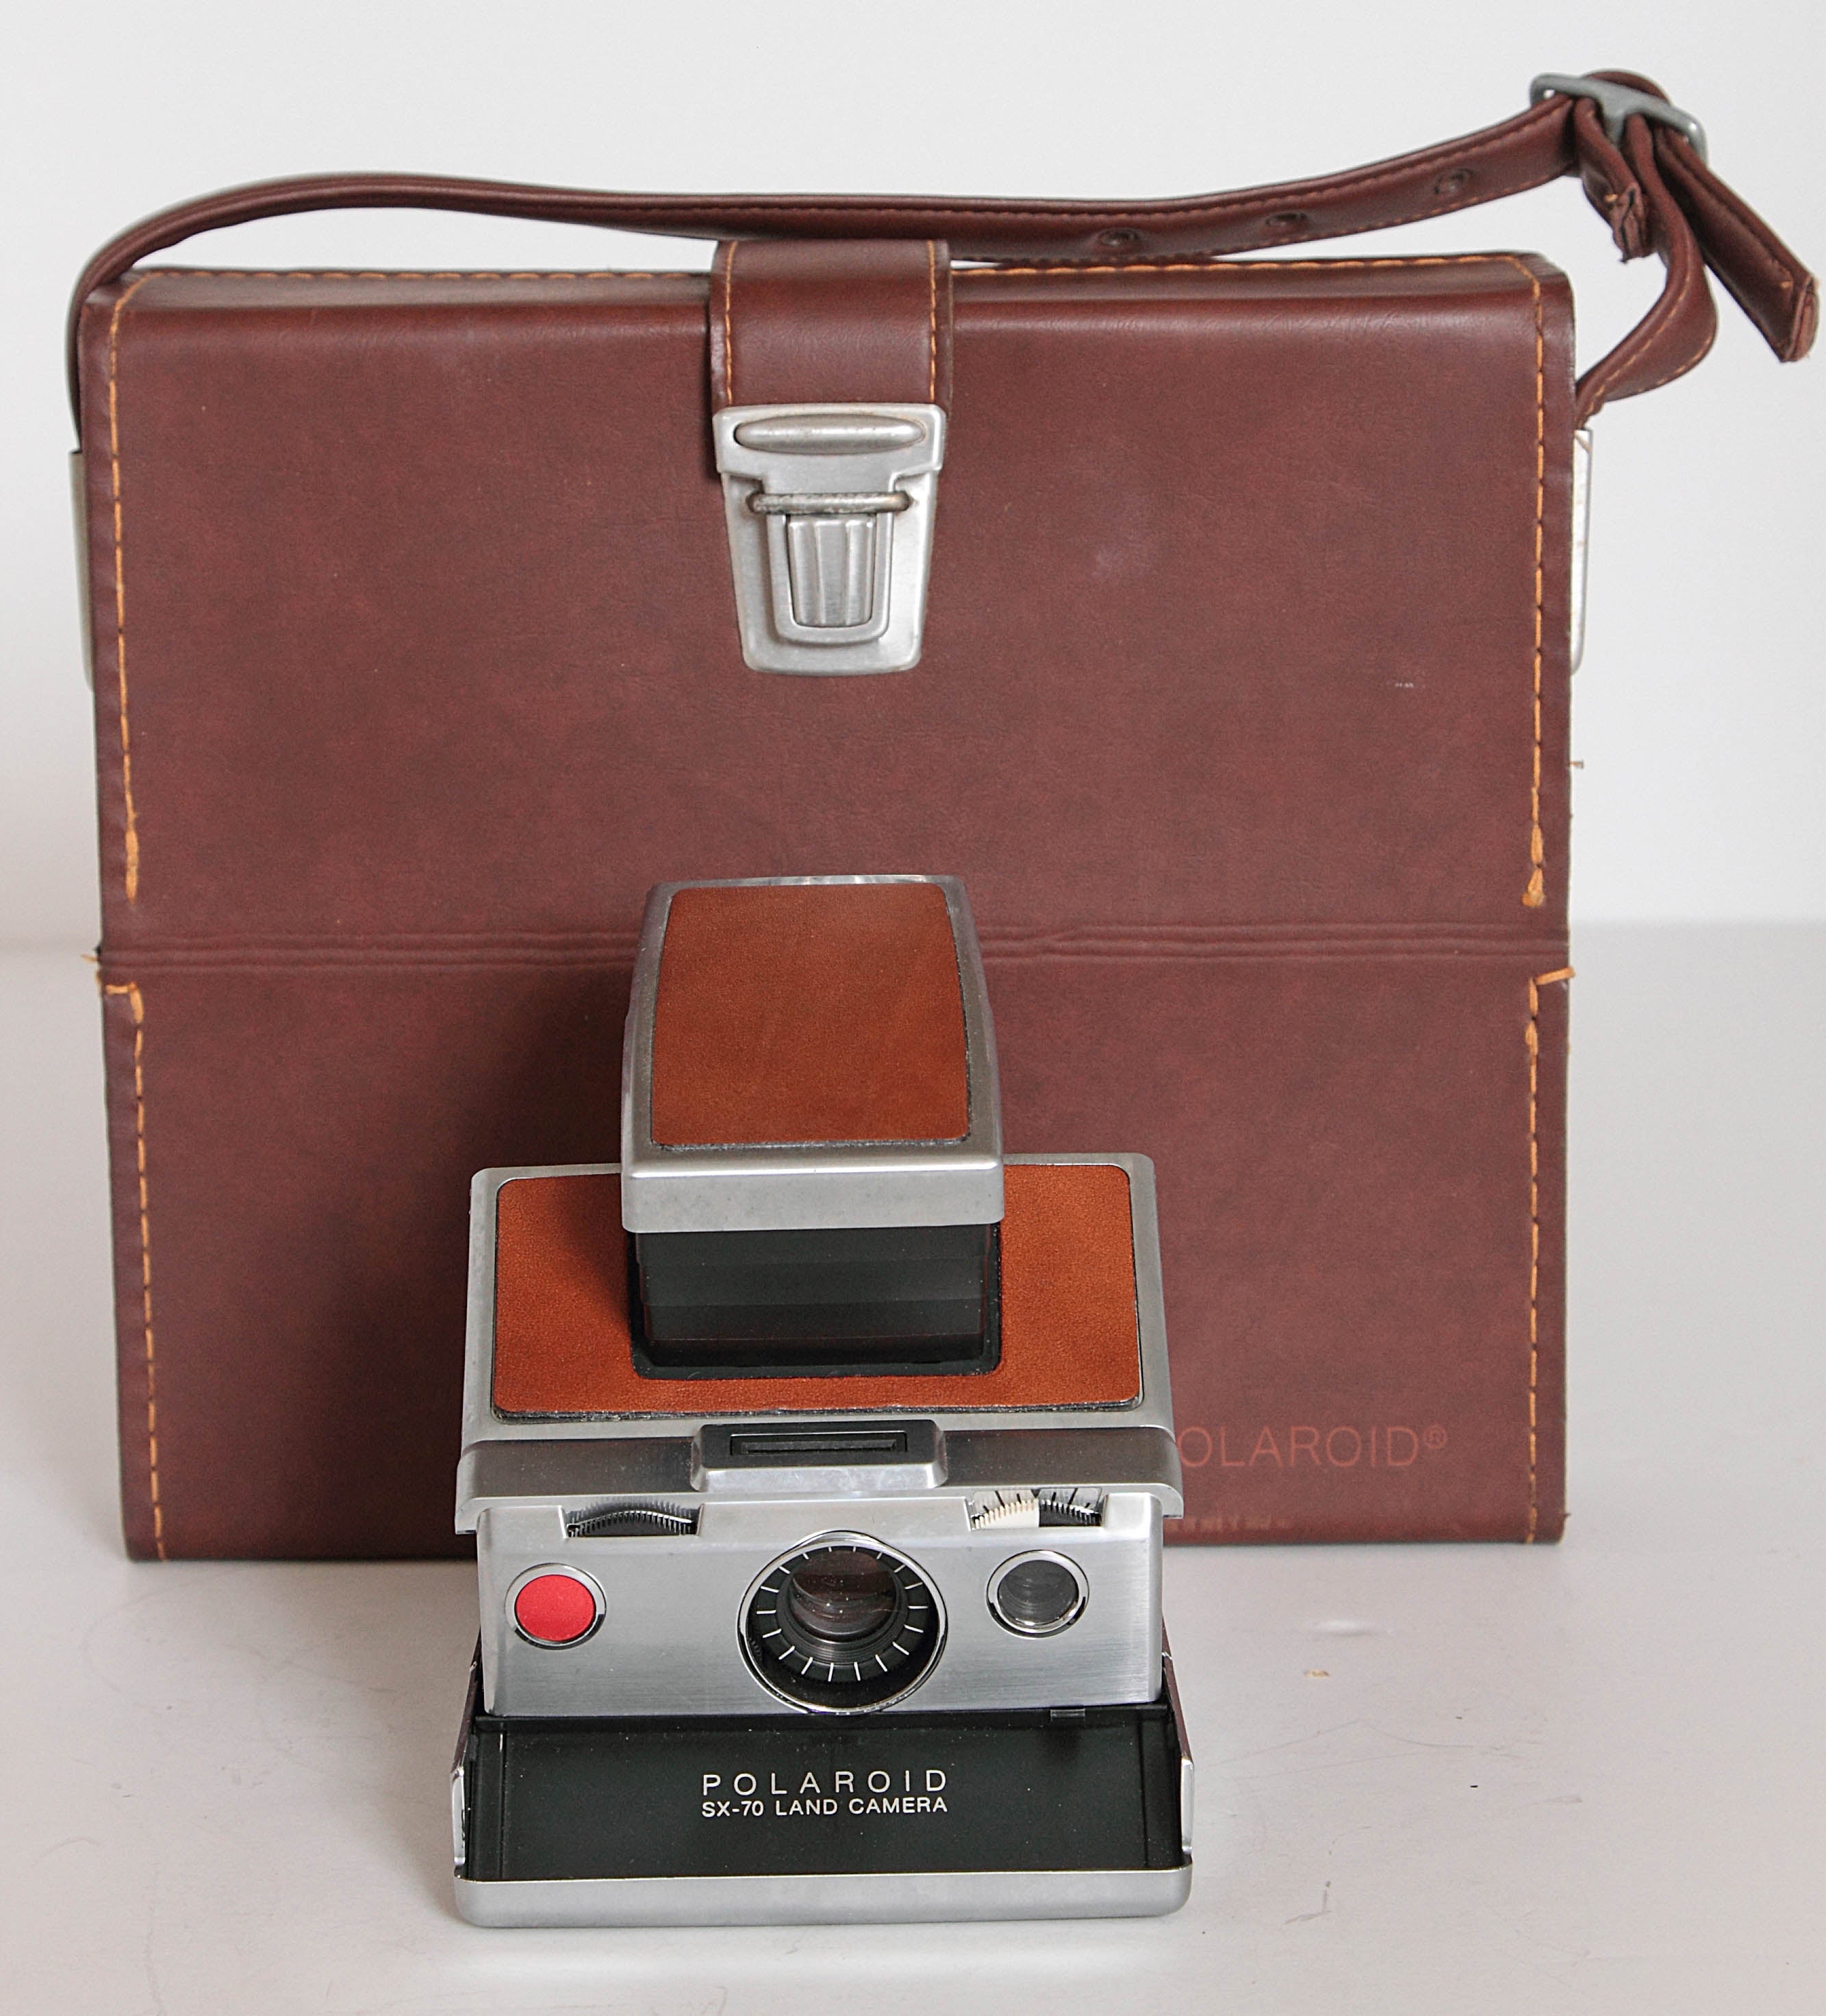 Midcentury Polaroid SX-70 land camera, with original case and accessories

The original magic camera, 1970s.
At the Polaroid company meeting in 1972, Edwin land stepped onto the stage, pulled a camera out of his jacket pocket, and took five